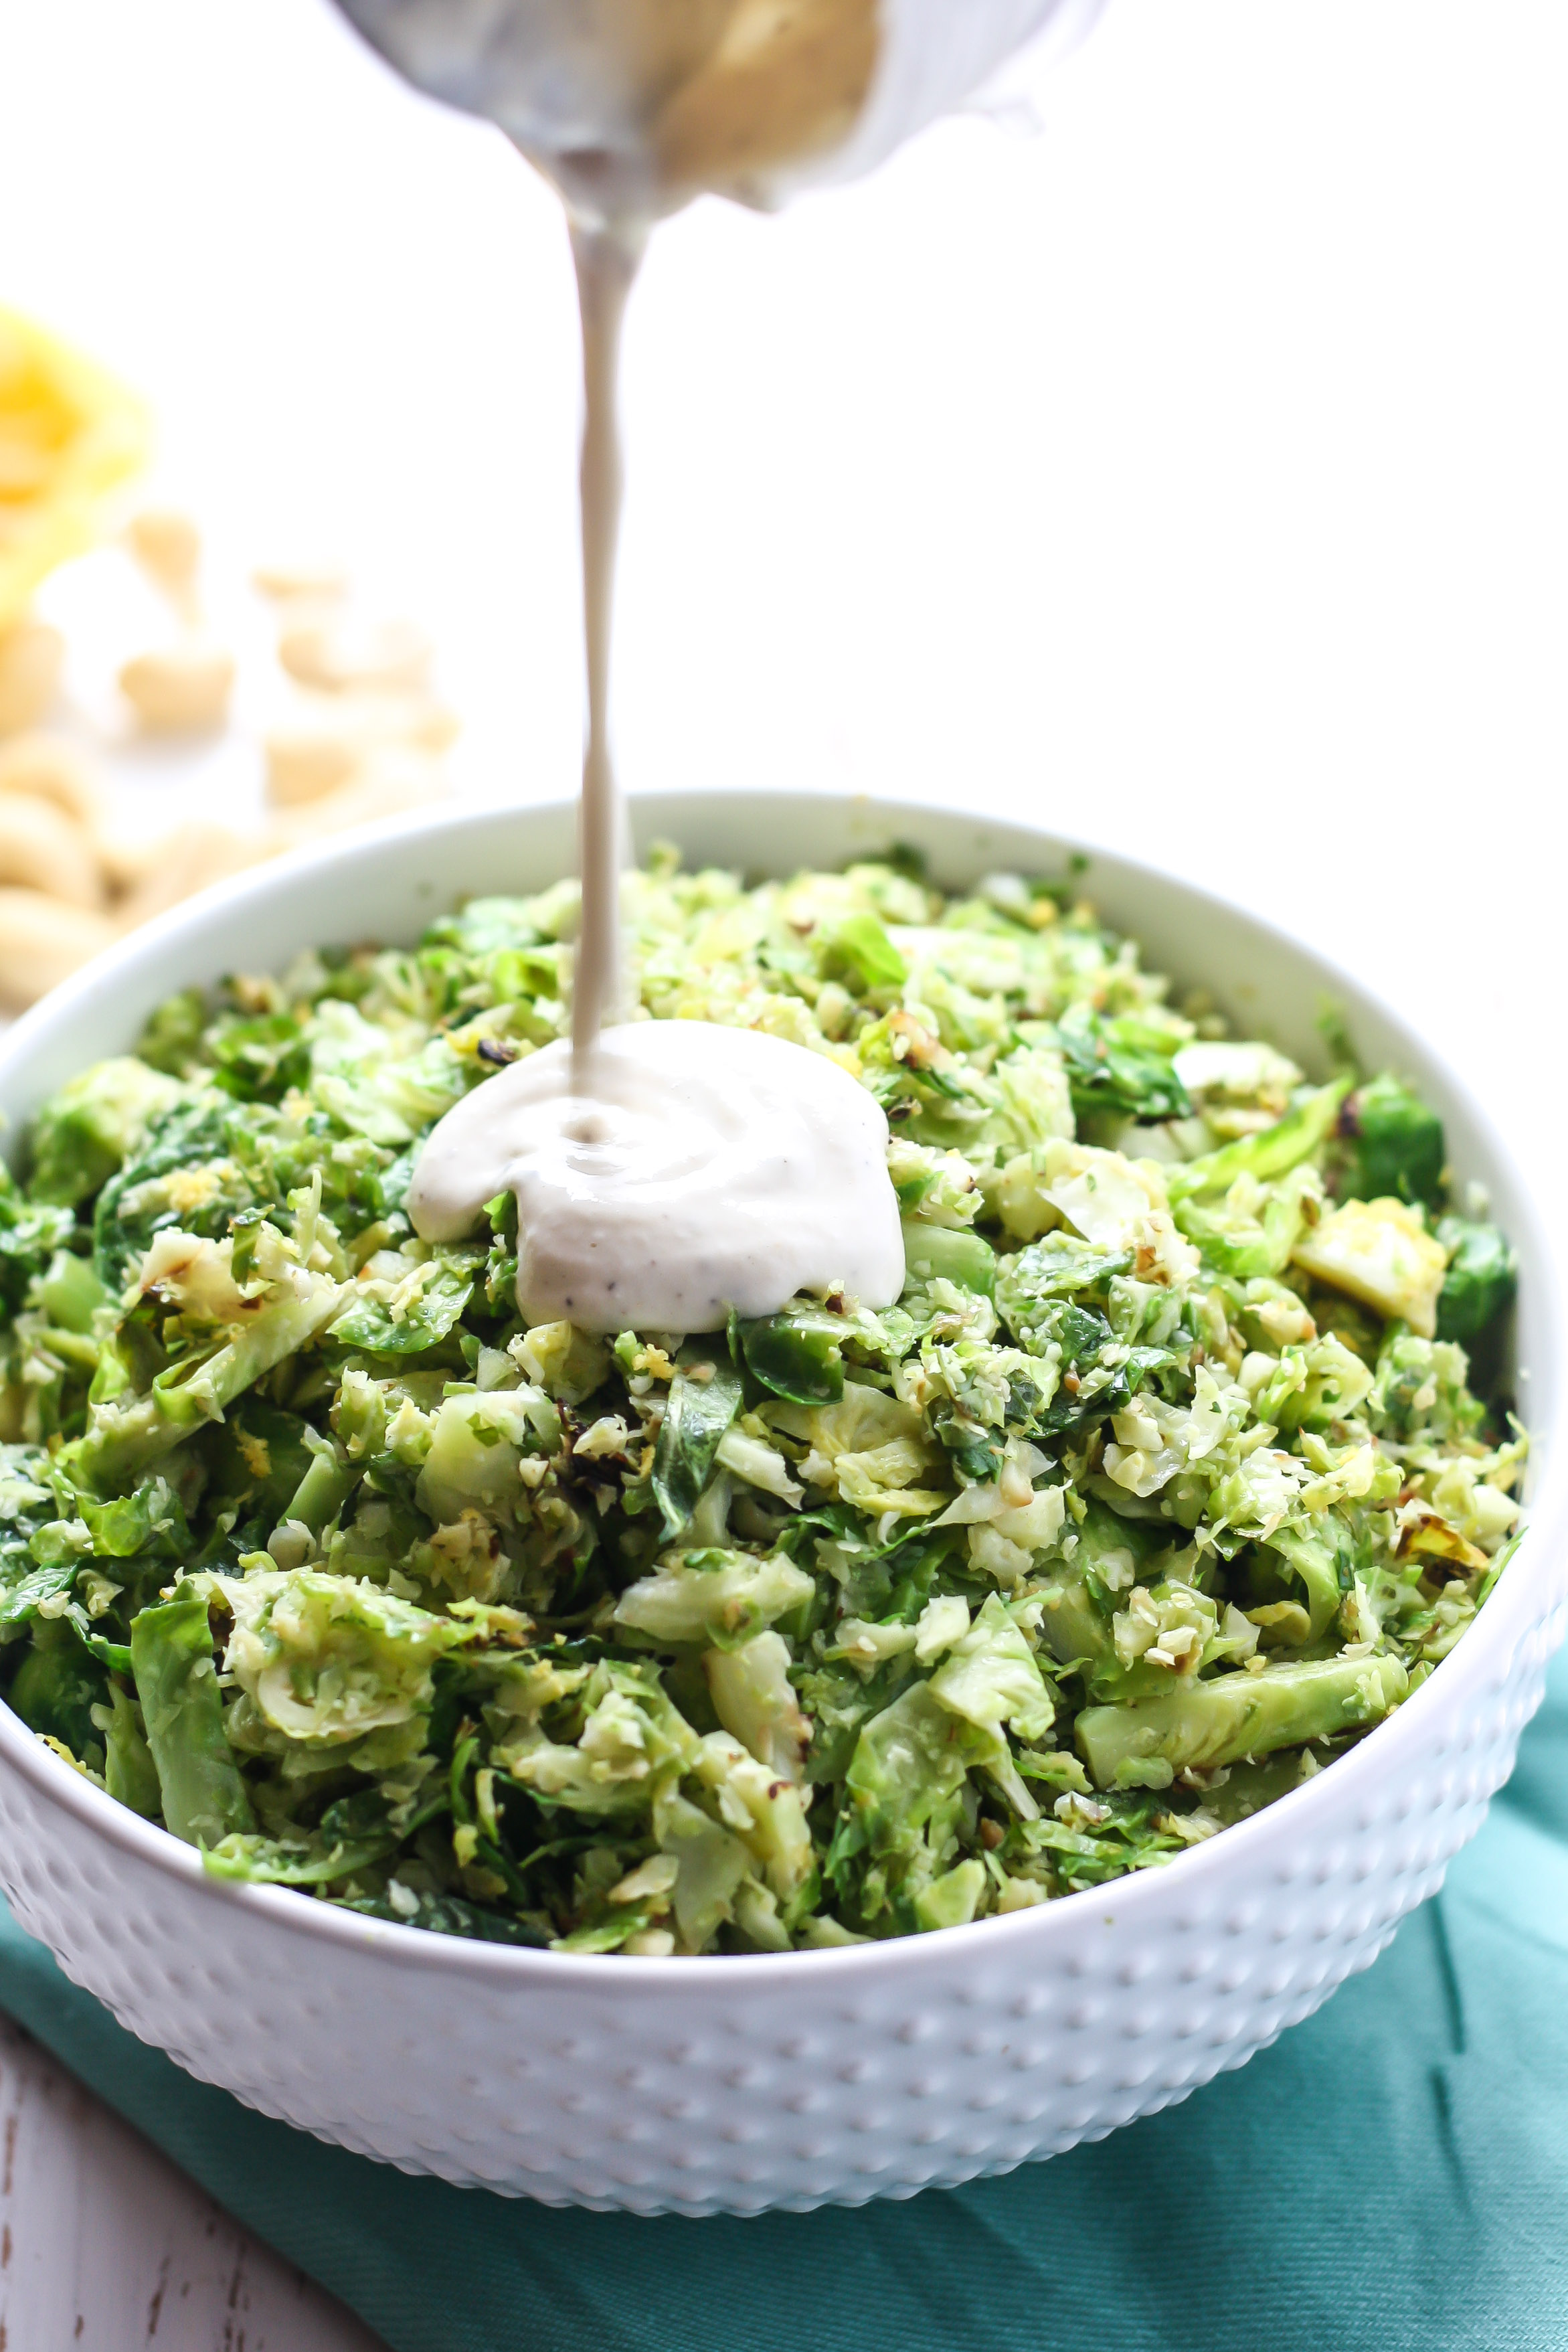 These Stovetop Shredded Brussels Sprouts with Lemon Pepper Cashew Dressing are an easy, flavorful side dish to add to your brunch menu. The homemade, vegan-friendly dressing takes these brussels sprouts to a whole new level!